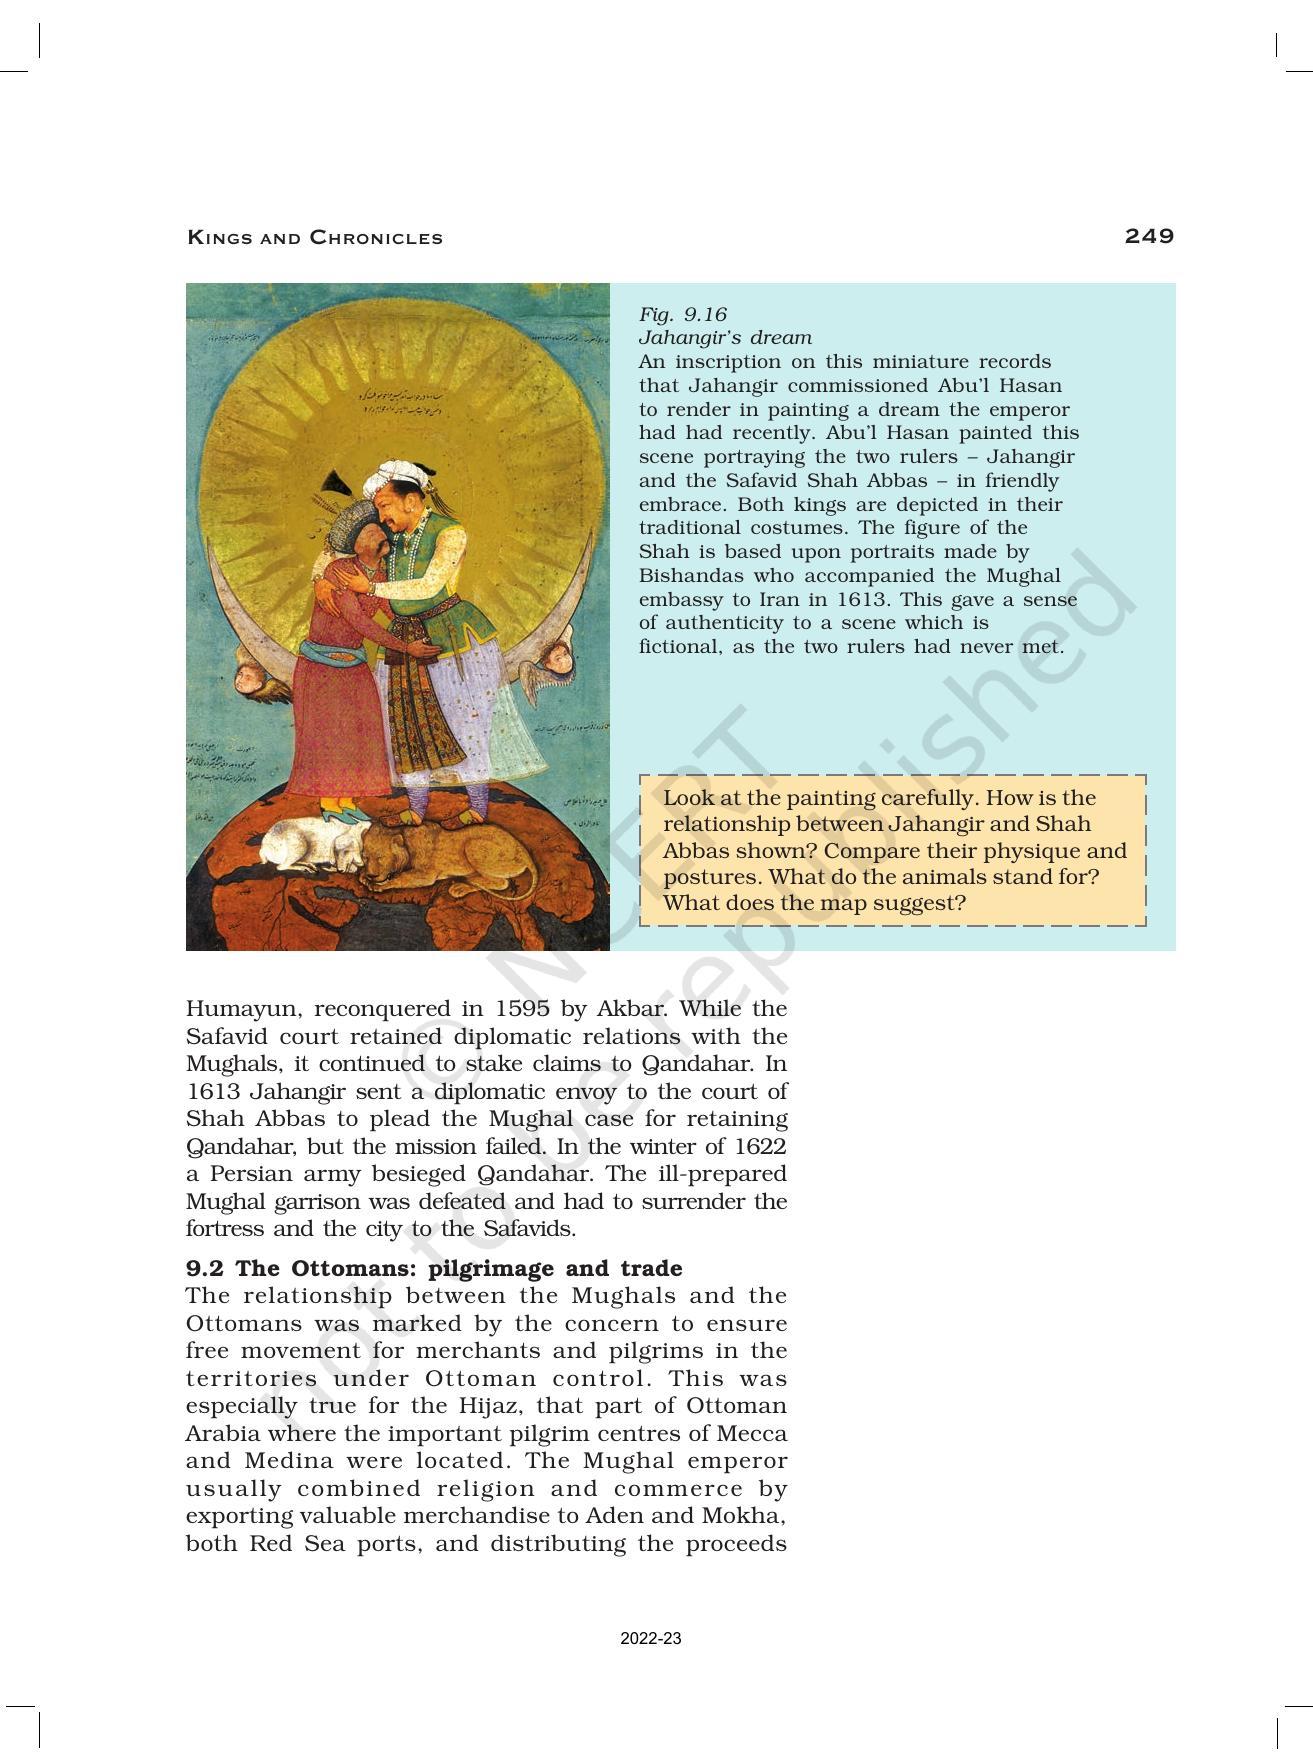 NCERT Book for Class 12 History (Part-II) Chapter 9 Kings and Chronicles - Page 26